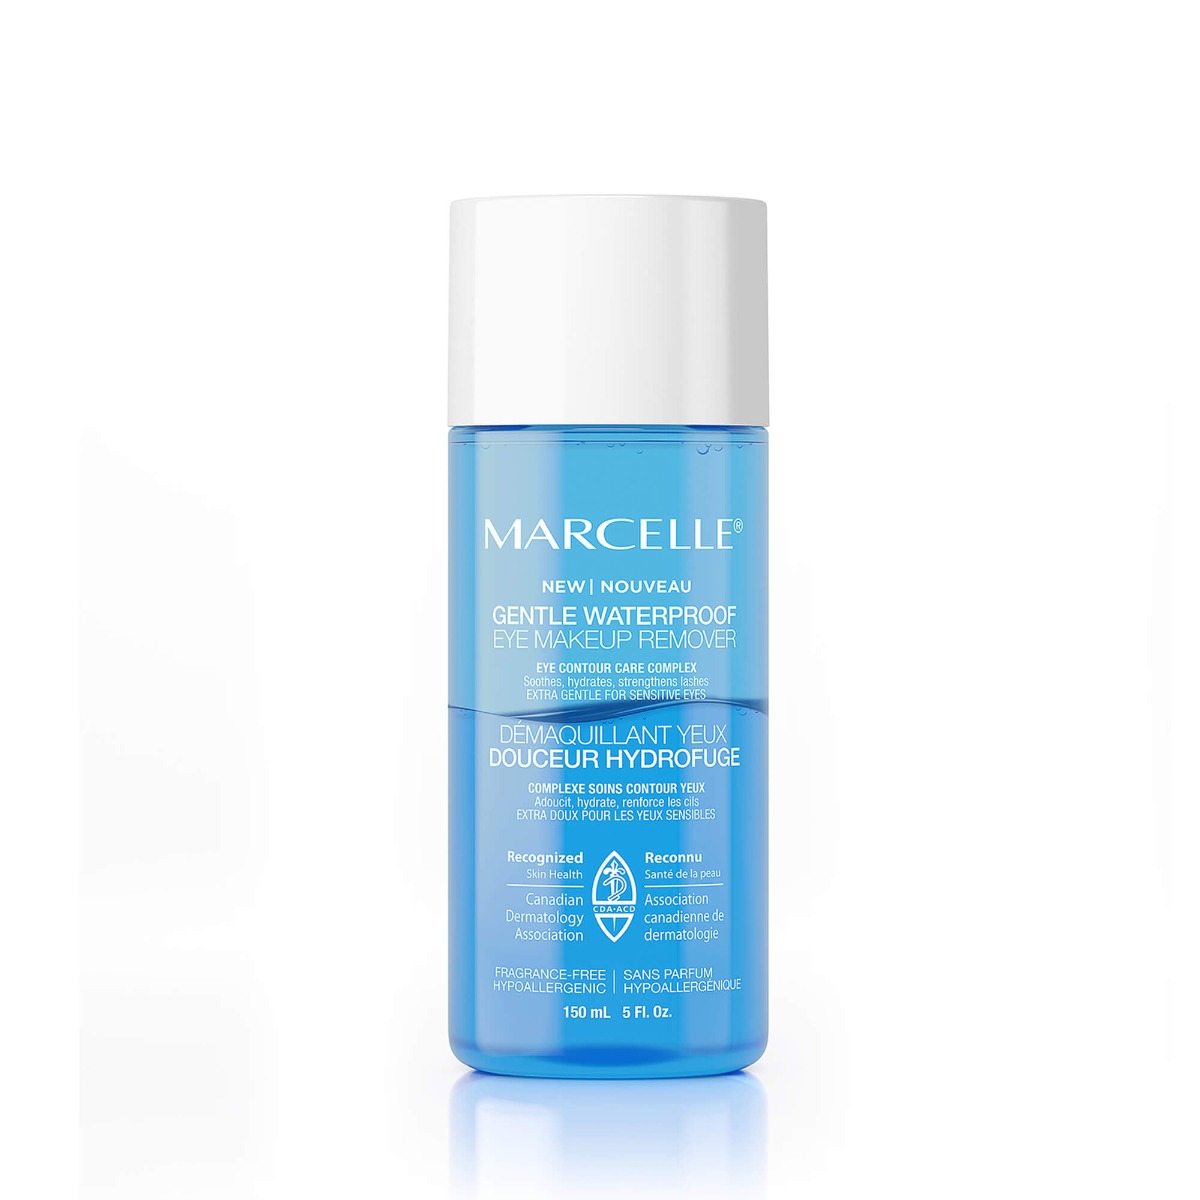 Shop Gentle Waterproof Eye Makeup Remover - 150mL by Marcelle for CA$15.95